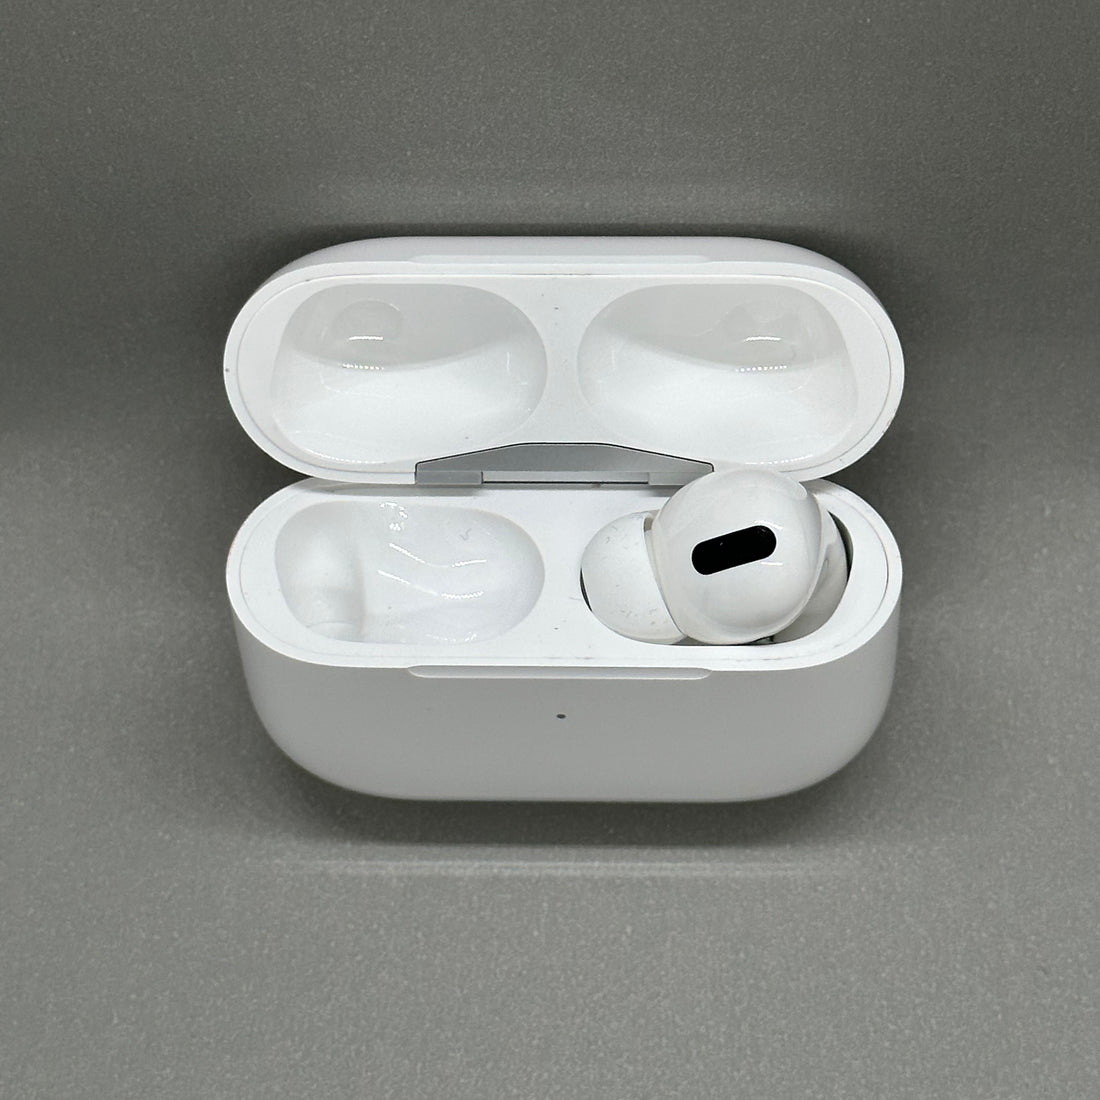 Lonely Right AirPod Pro in the Charging Case